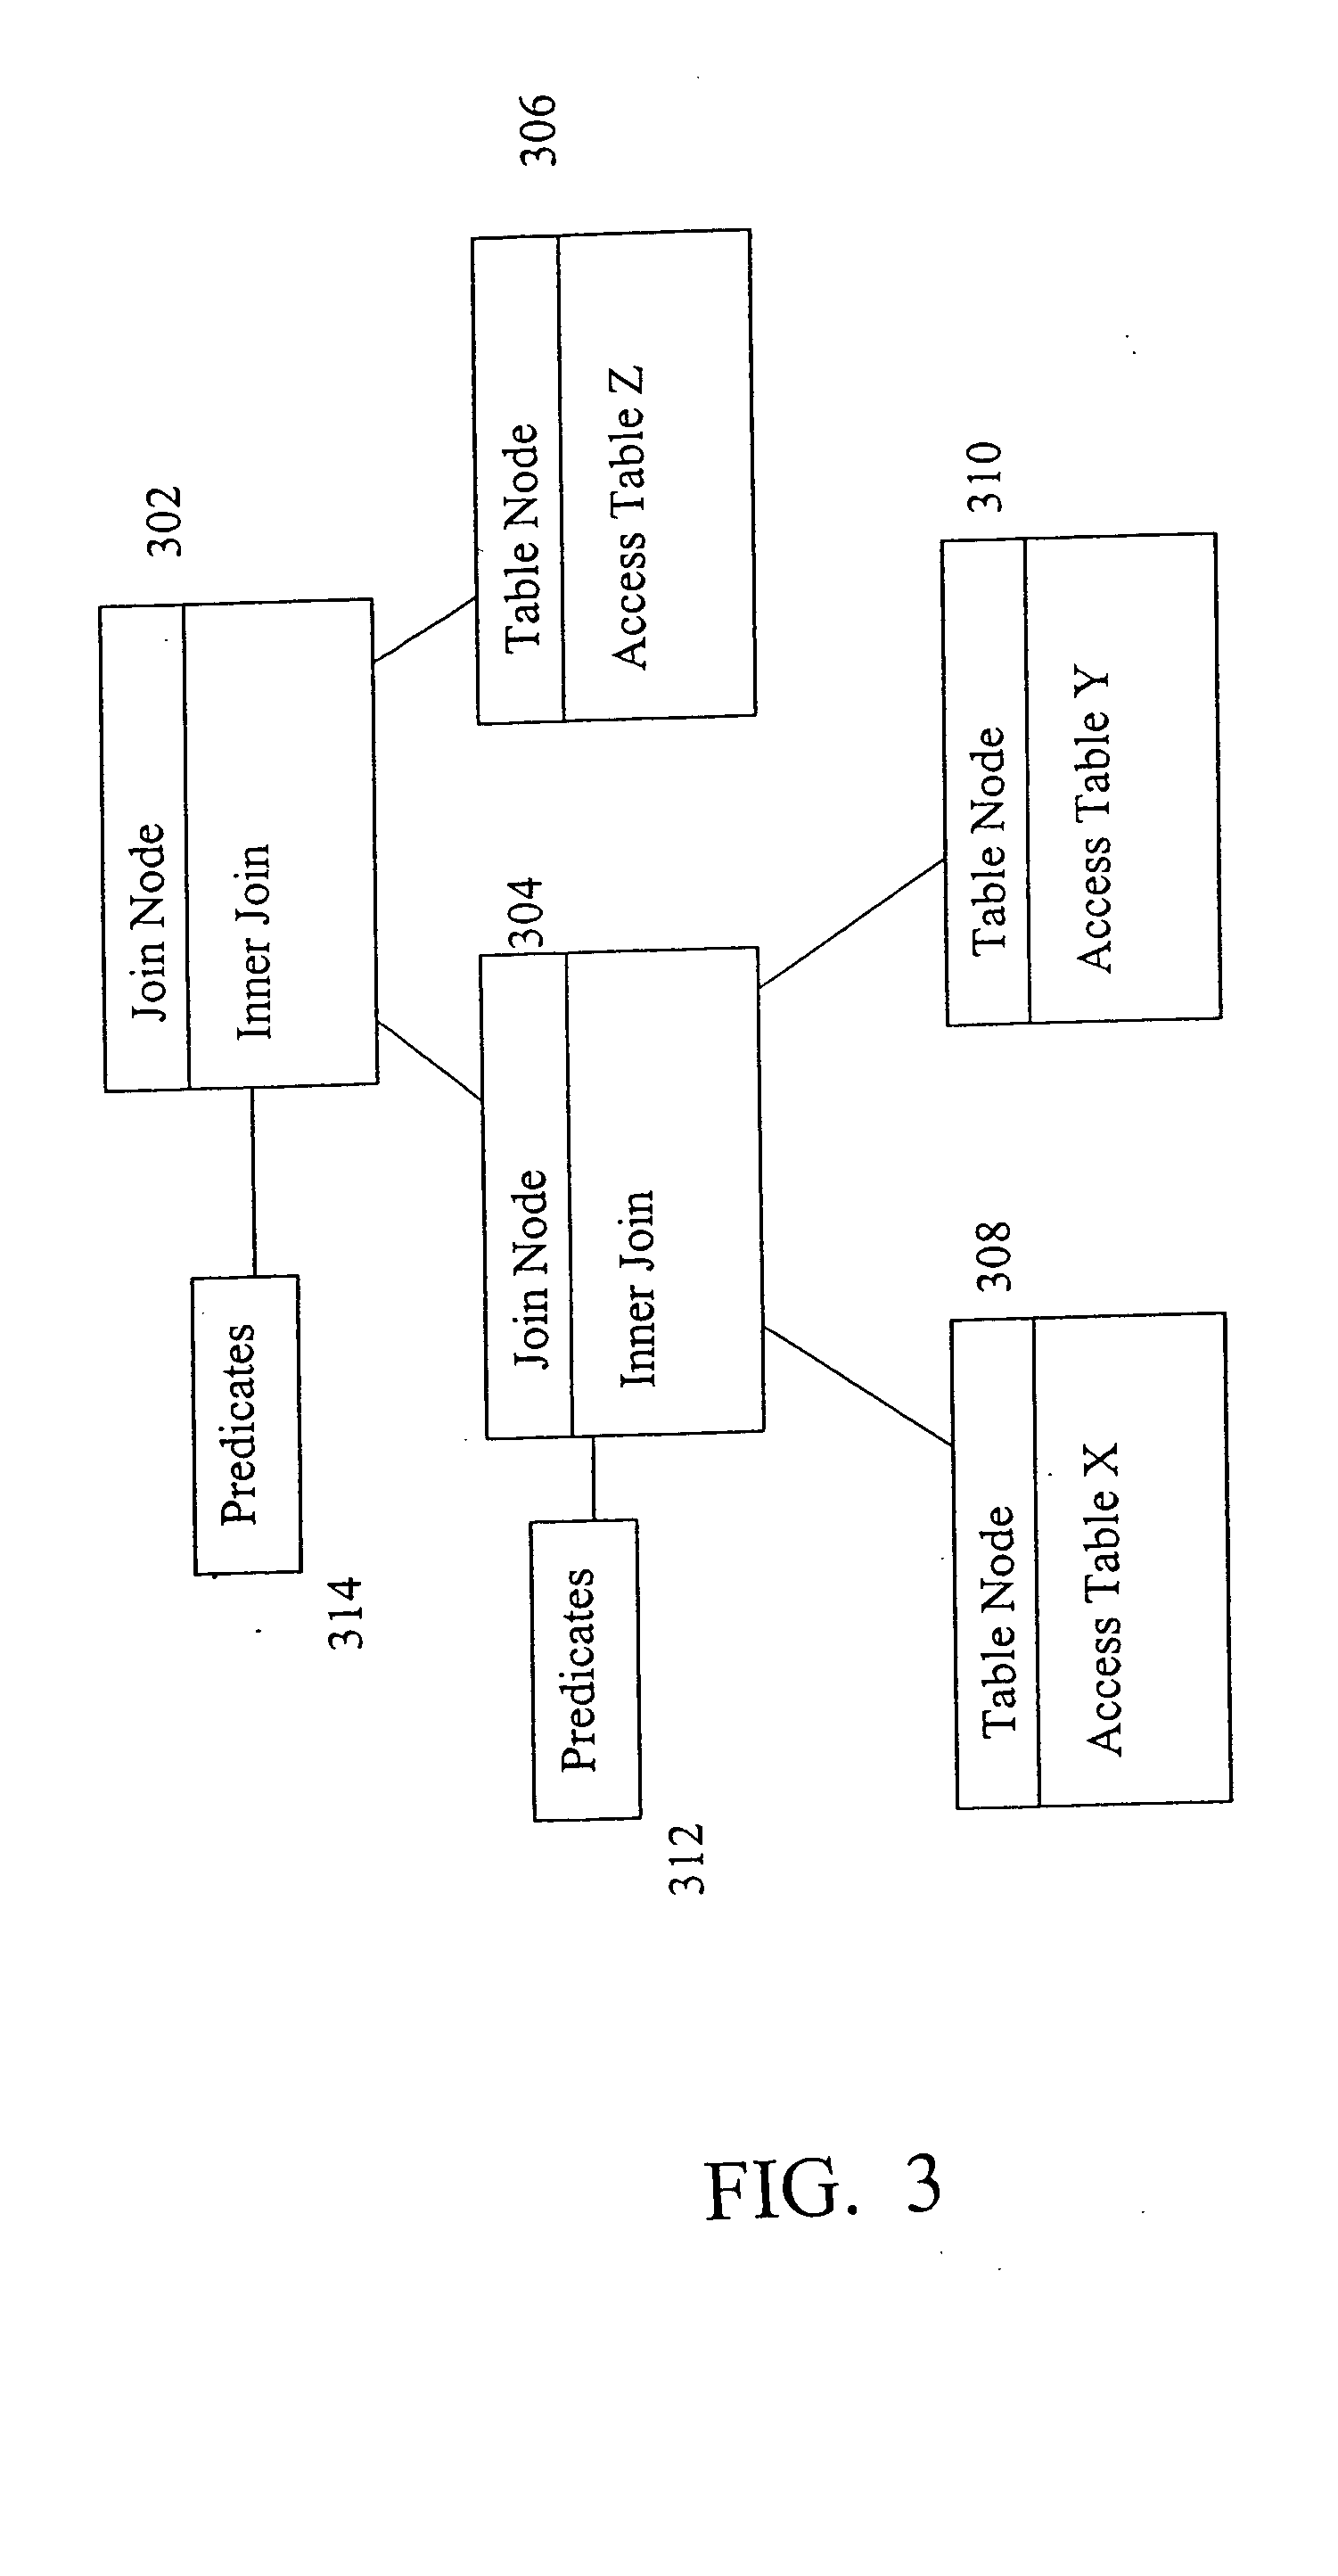 Method and system for dynamic join reordering